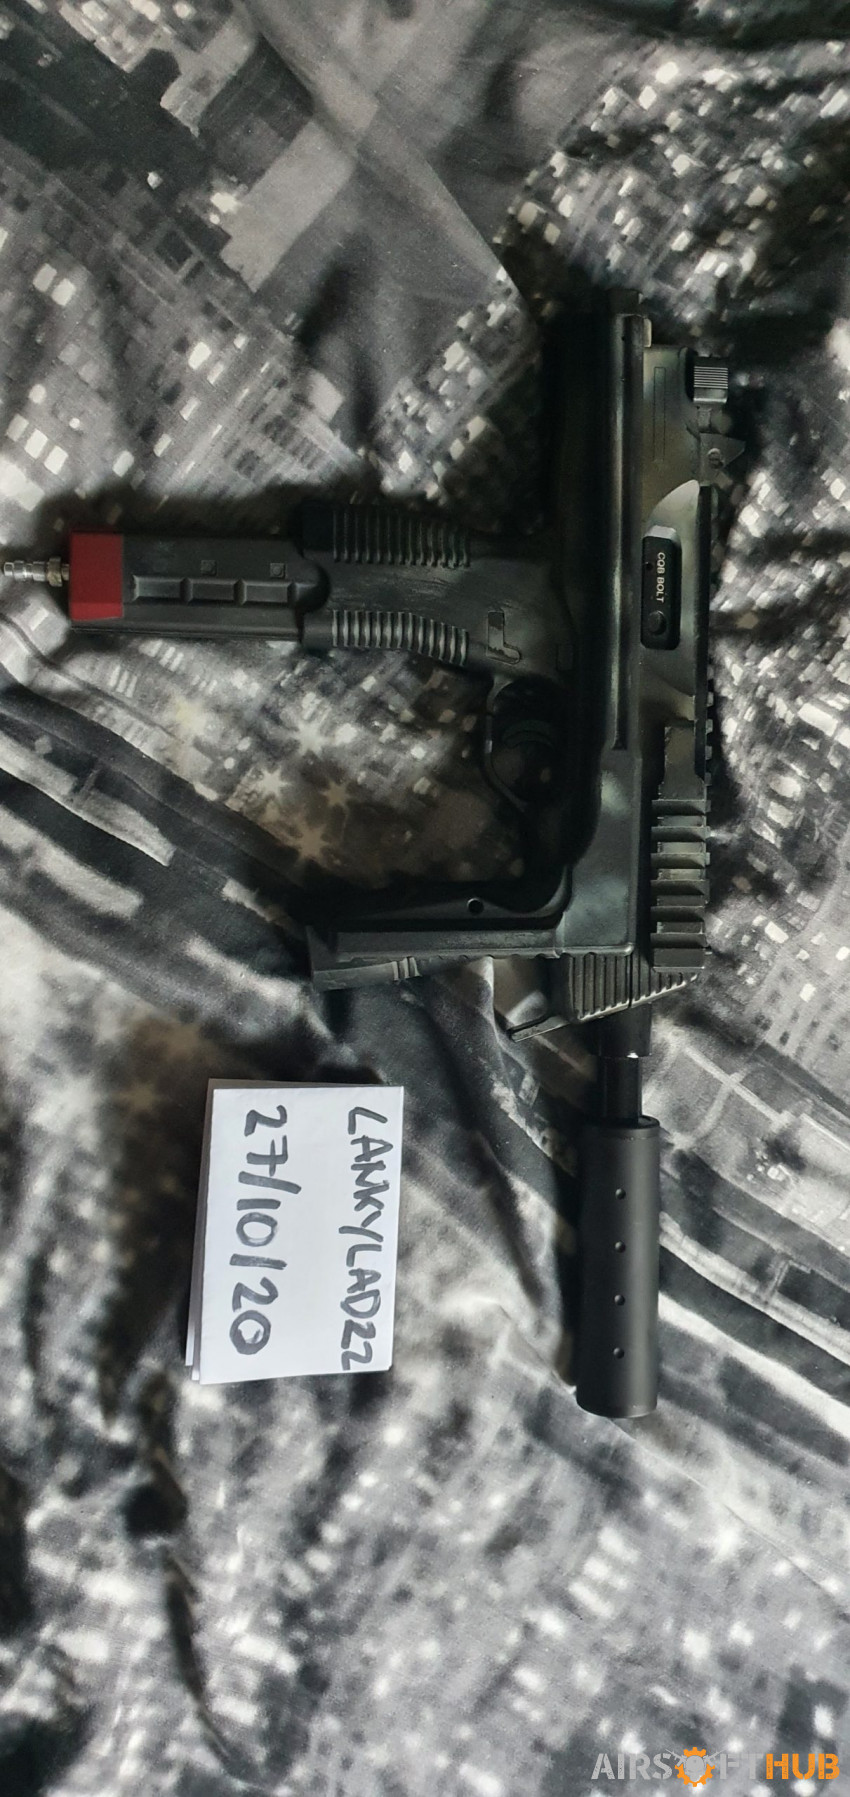 ASG B&T MP9 - Used airsoft equipment